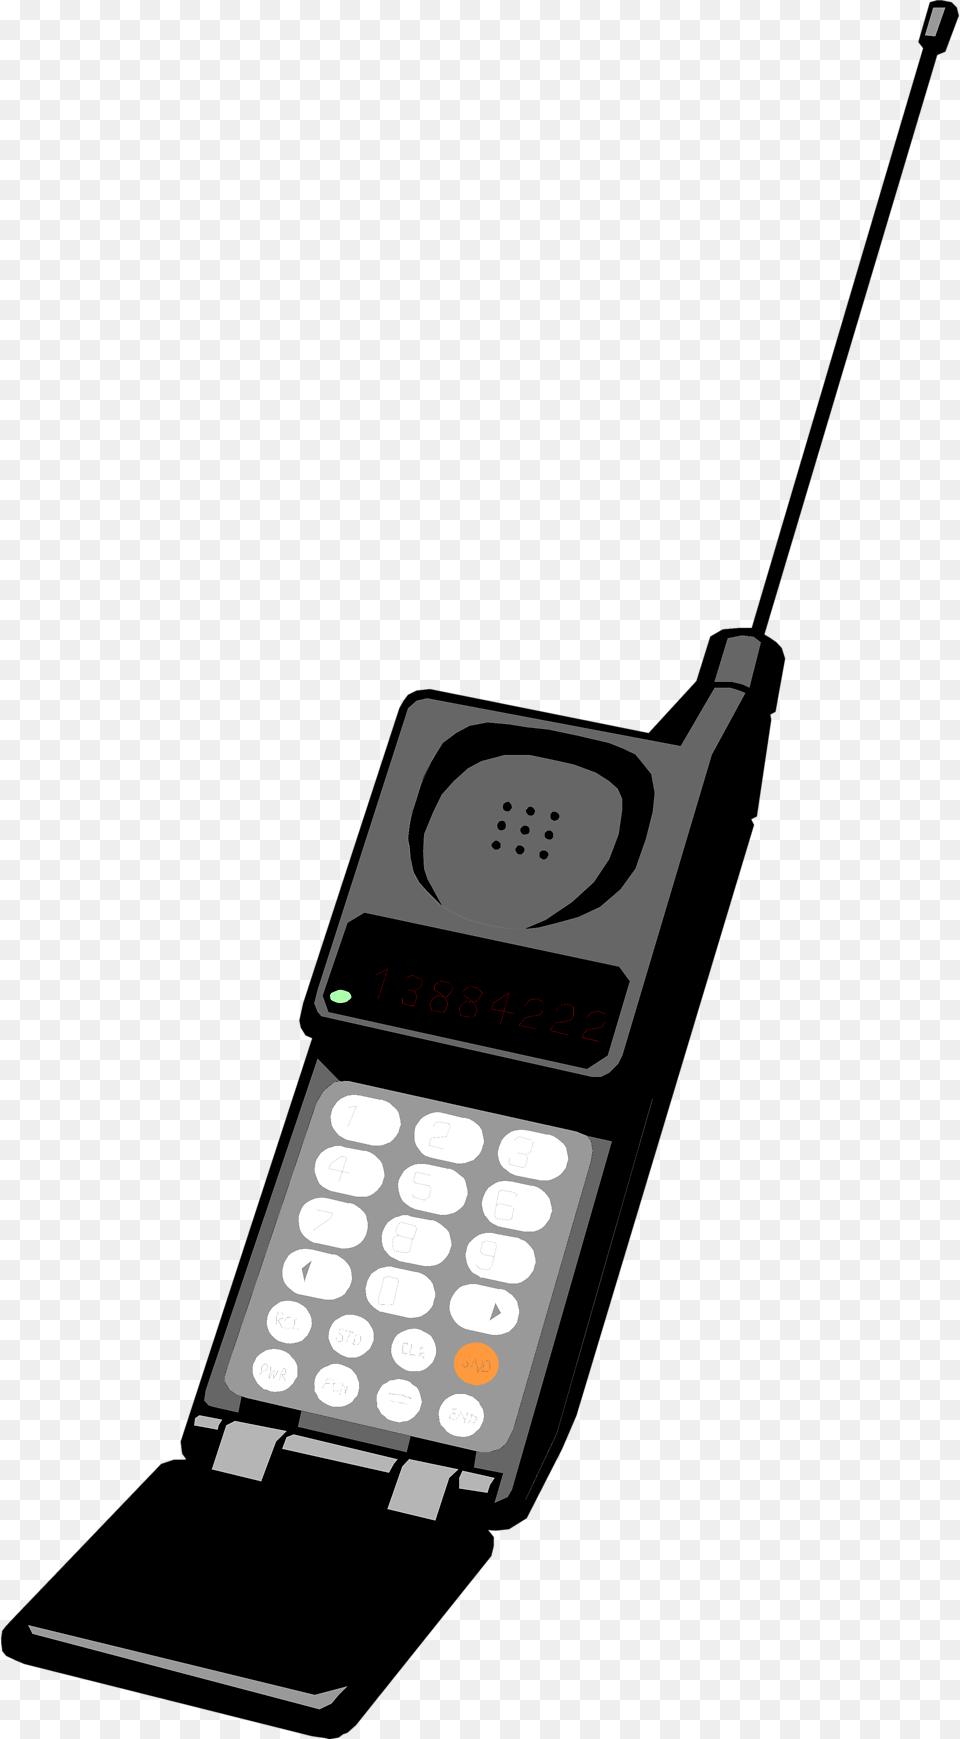 Phone Cell Stock Photo Illustration Of Satellite Cell Phone Clip Art, Electronics, Mobile Phone, Dynamite, Weapon Free Transparent Png